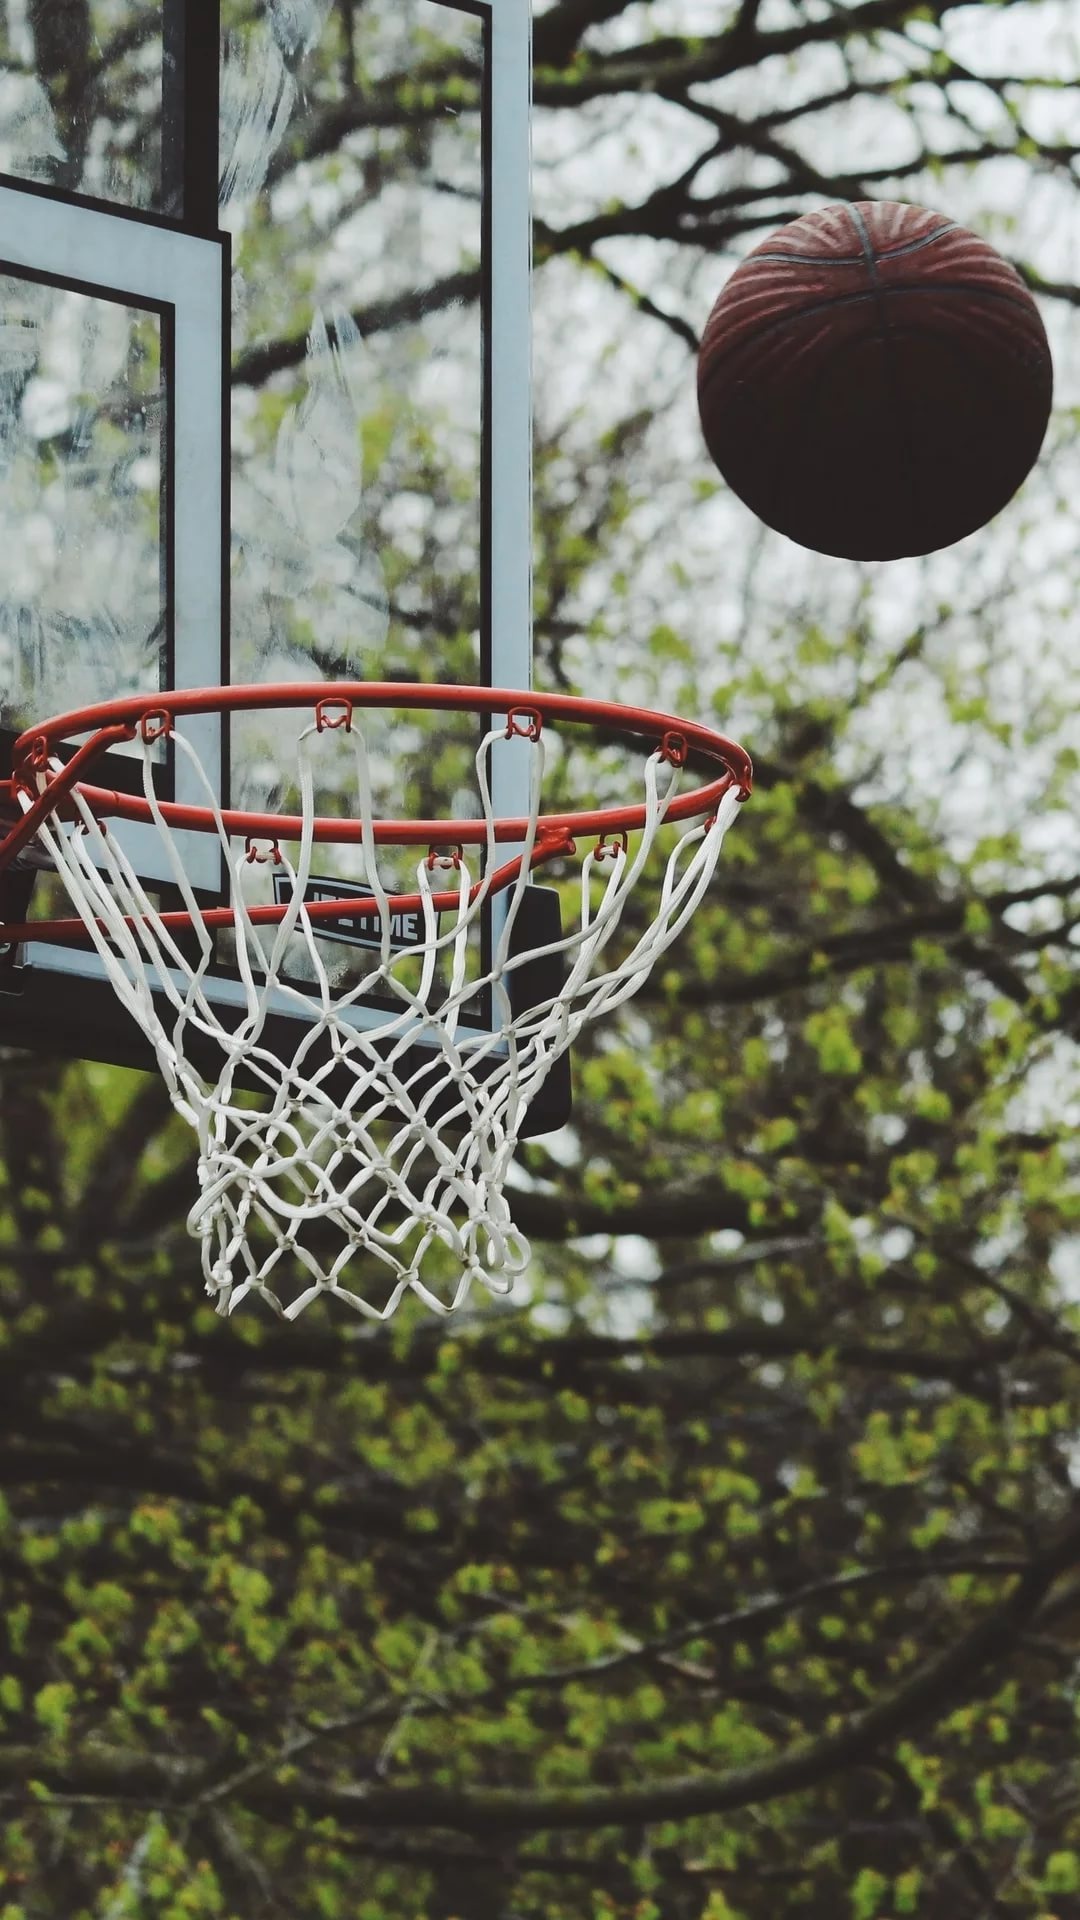 Streetball: Street basketball, A variation of basketball, typically played on outdoor courts. 1080x1920 Full HD Background.